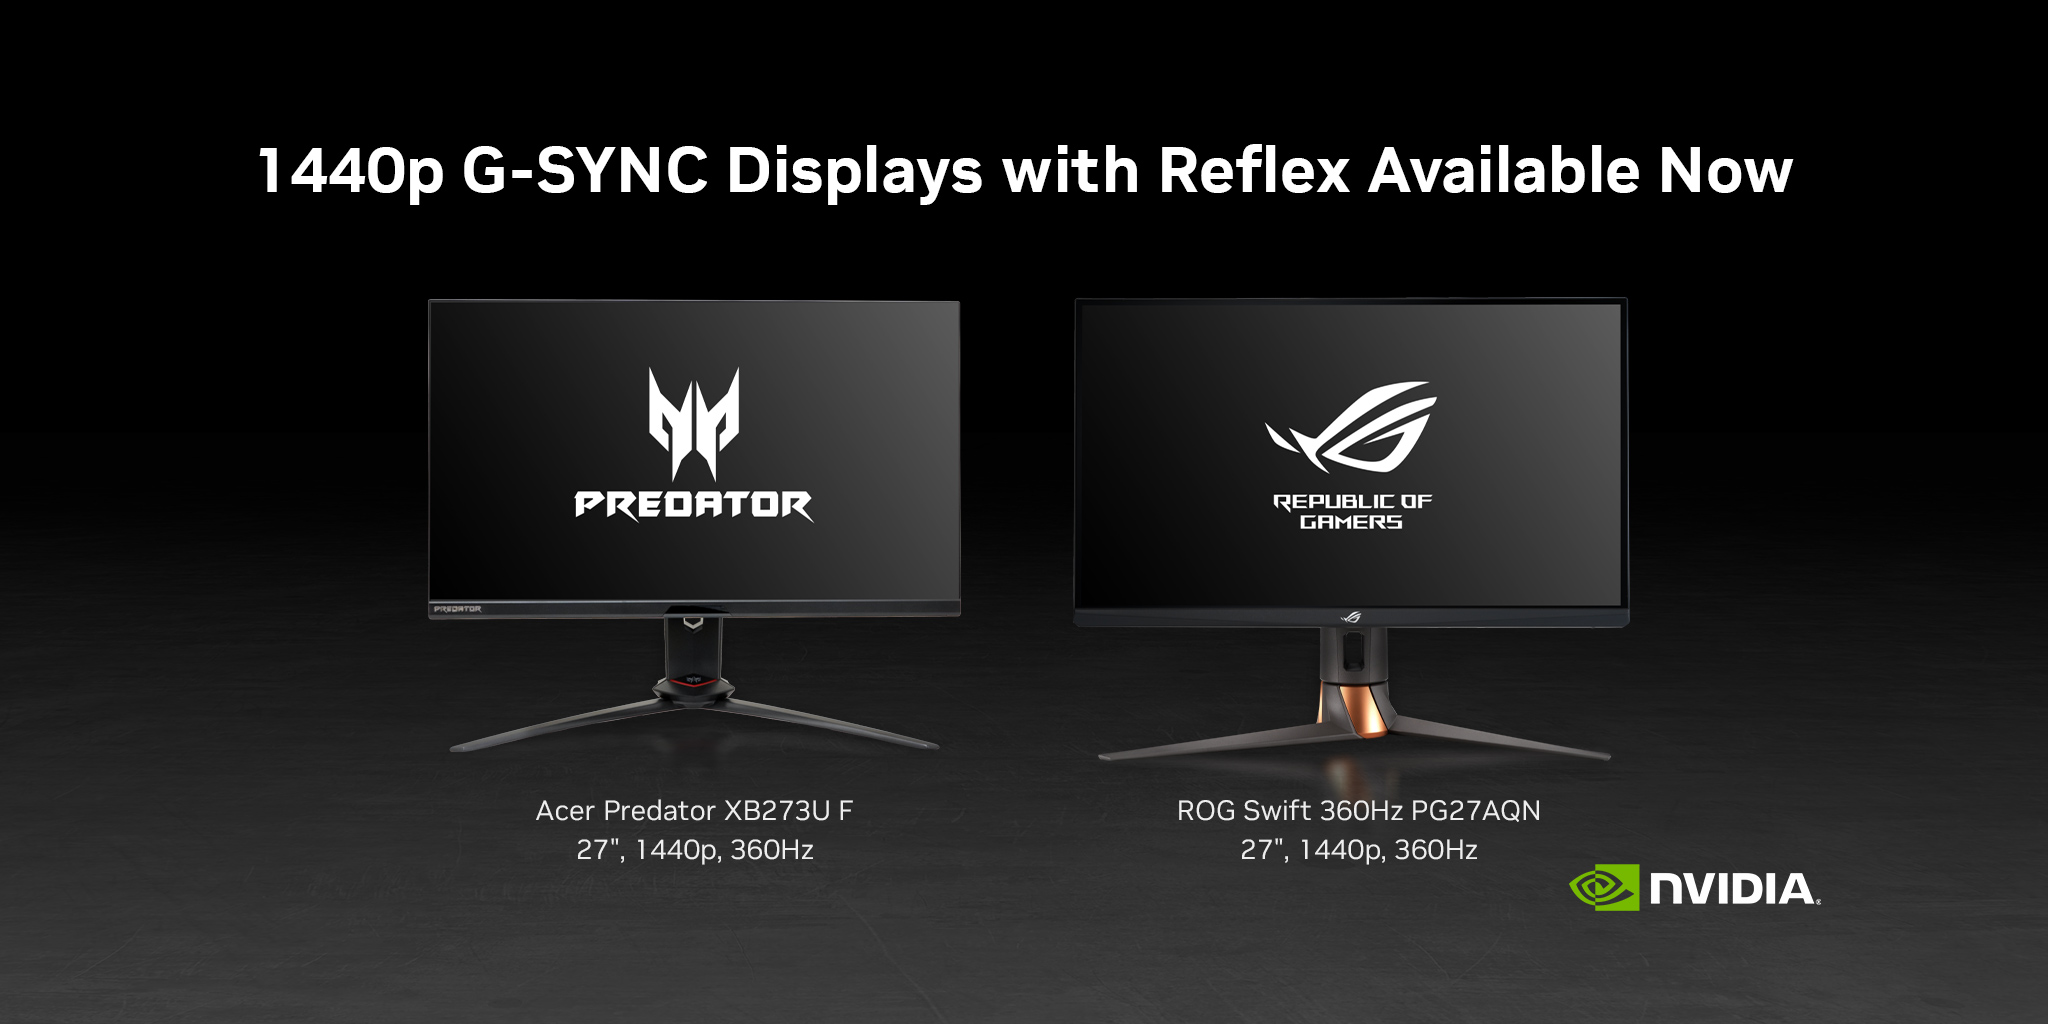 ASUS and NVIDIA Announce 360 Hz Esports Displays — And Blur Busters Creates  Custom TestUFO Test